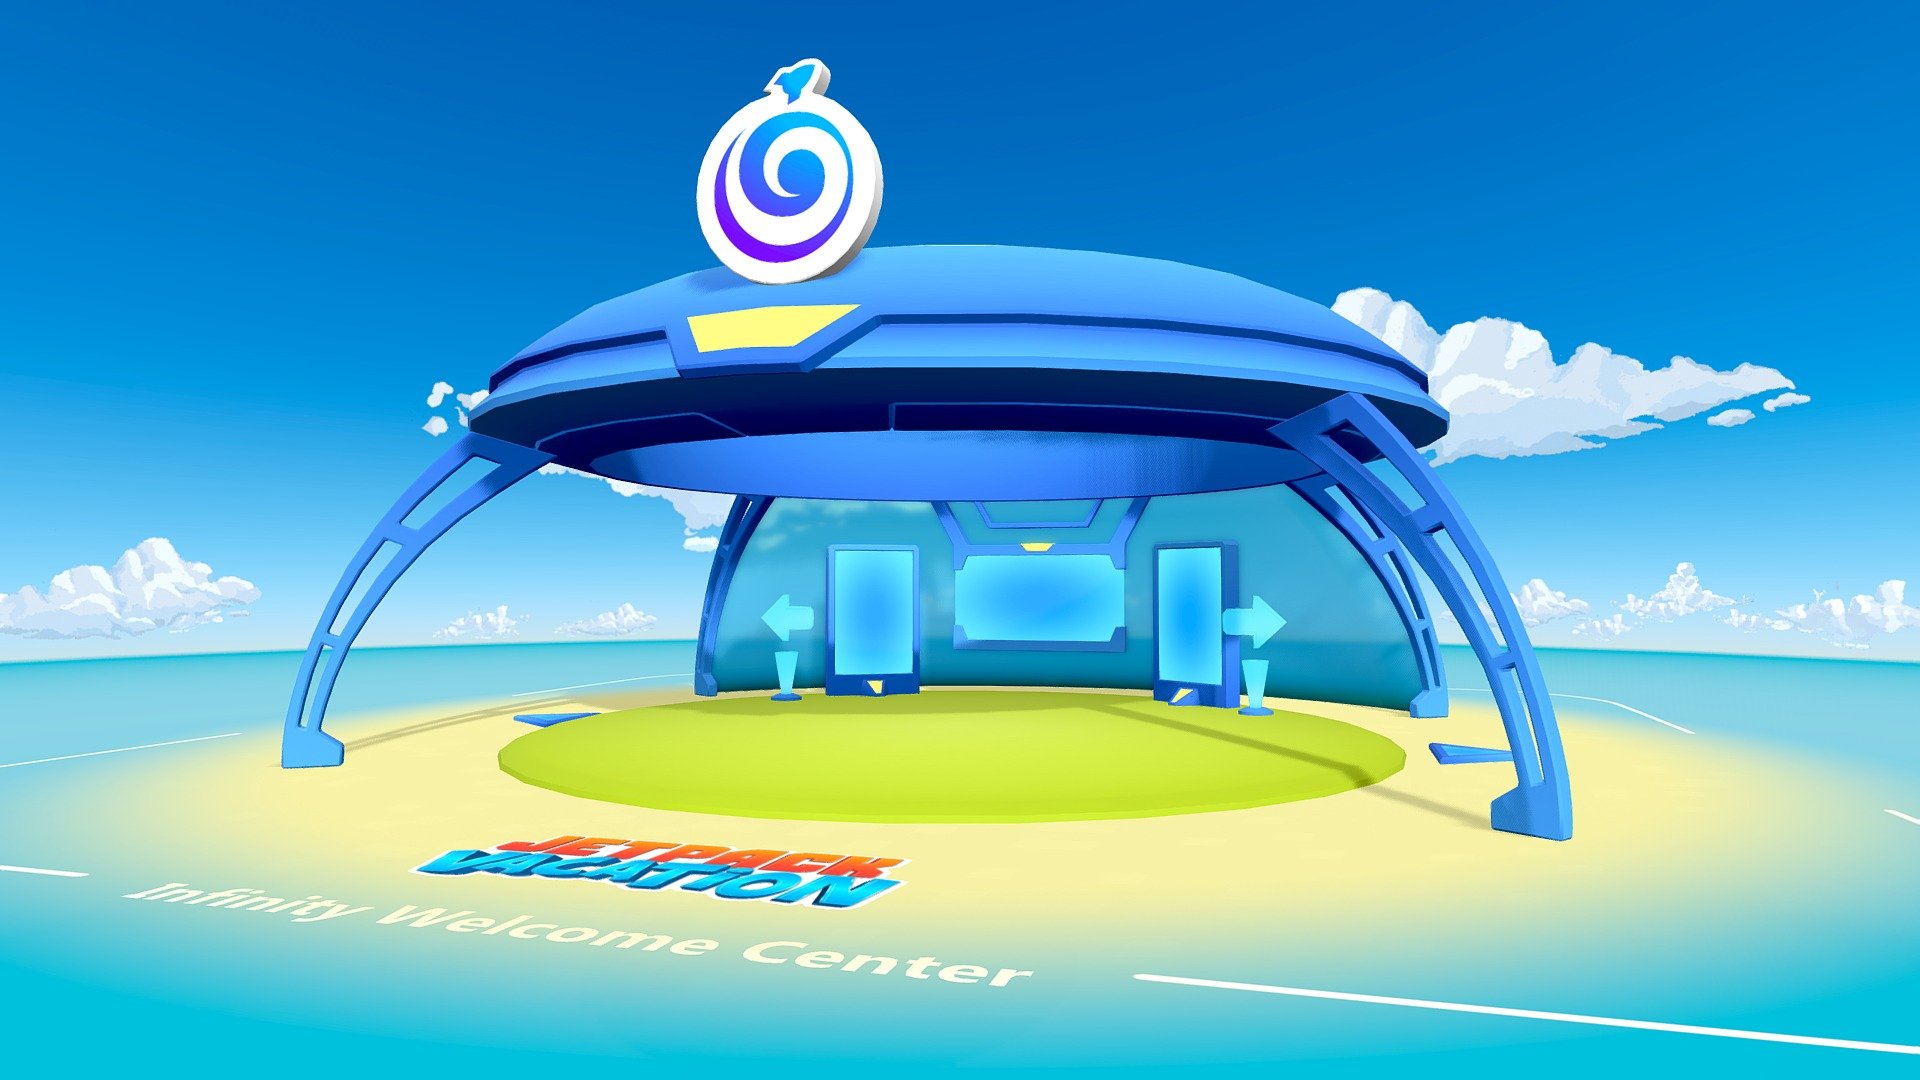 Welcome Center Structure
An information center showing all of the exciting activies offered by Tourism Infinty as part of your Jetpack Vacation package!

Environment prop created for VR game Jetpack Vacation and based on a concept by Ken Tan. Everything was modeled and created with Blender 3d model